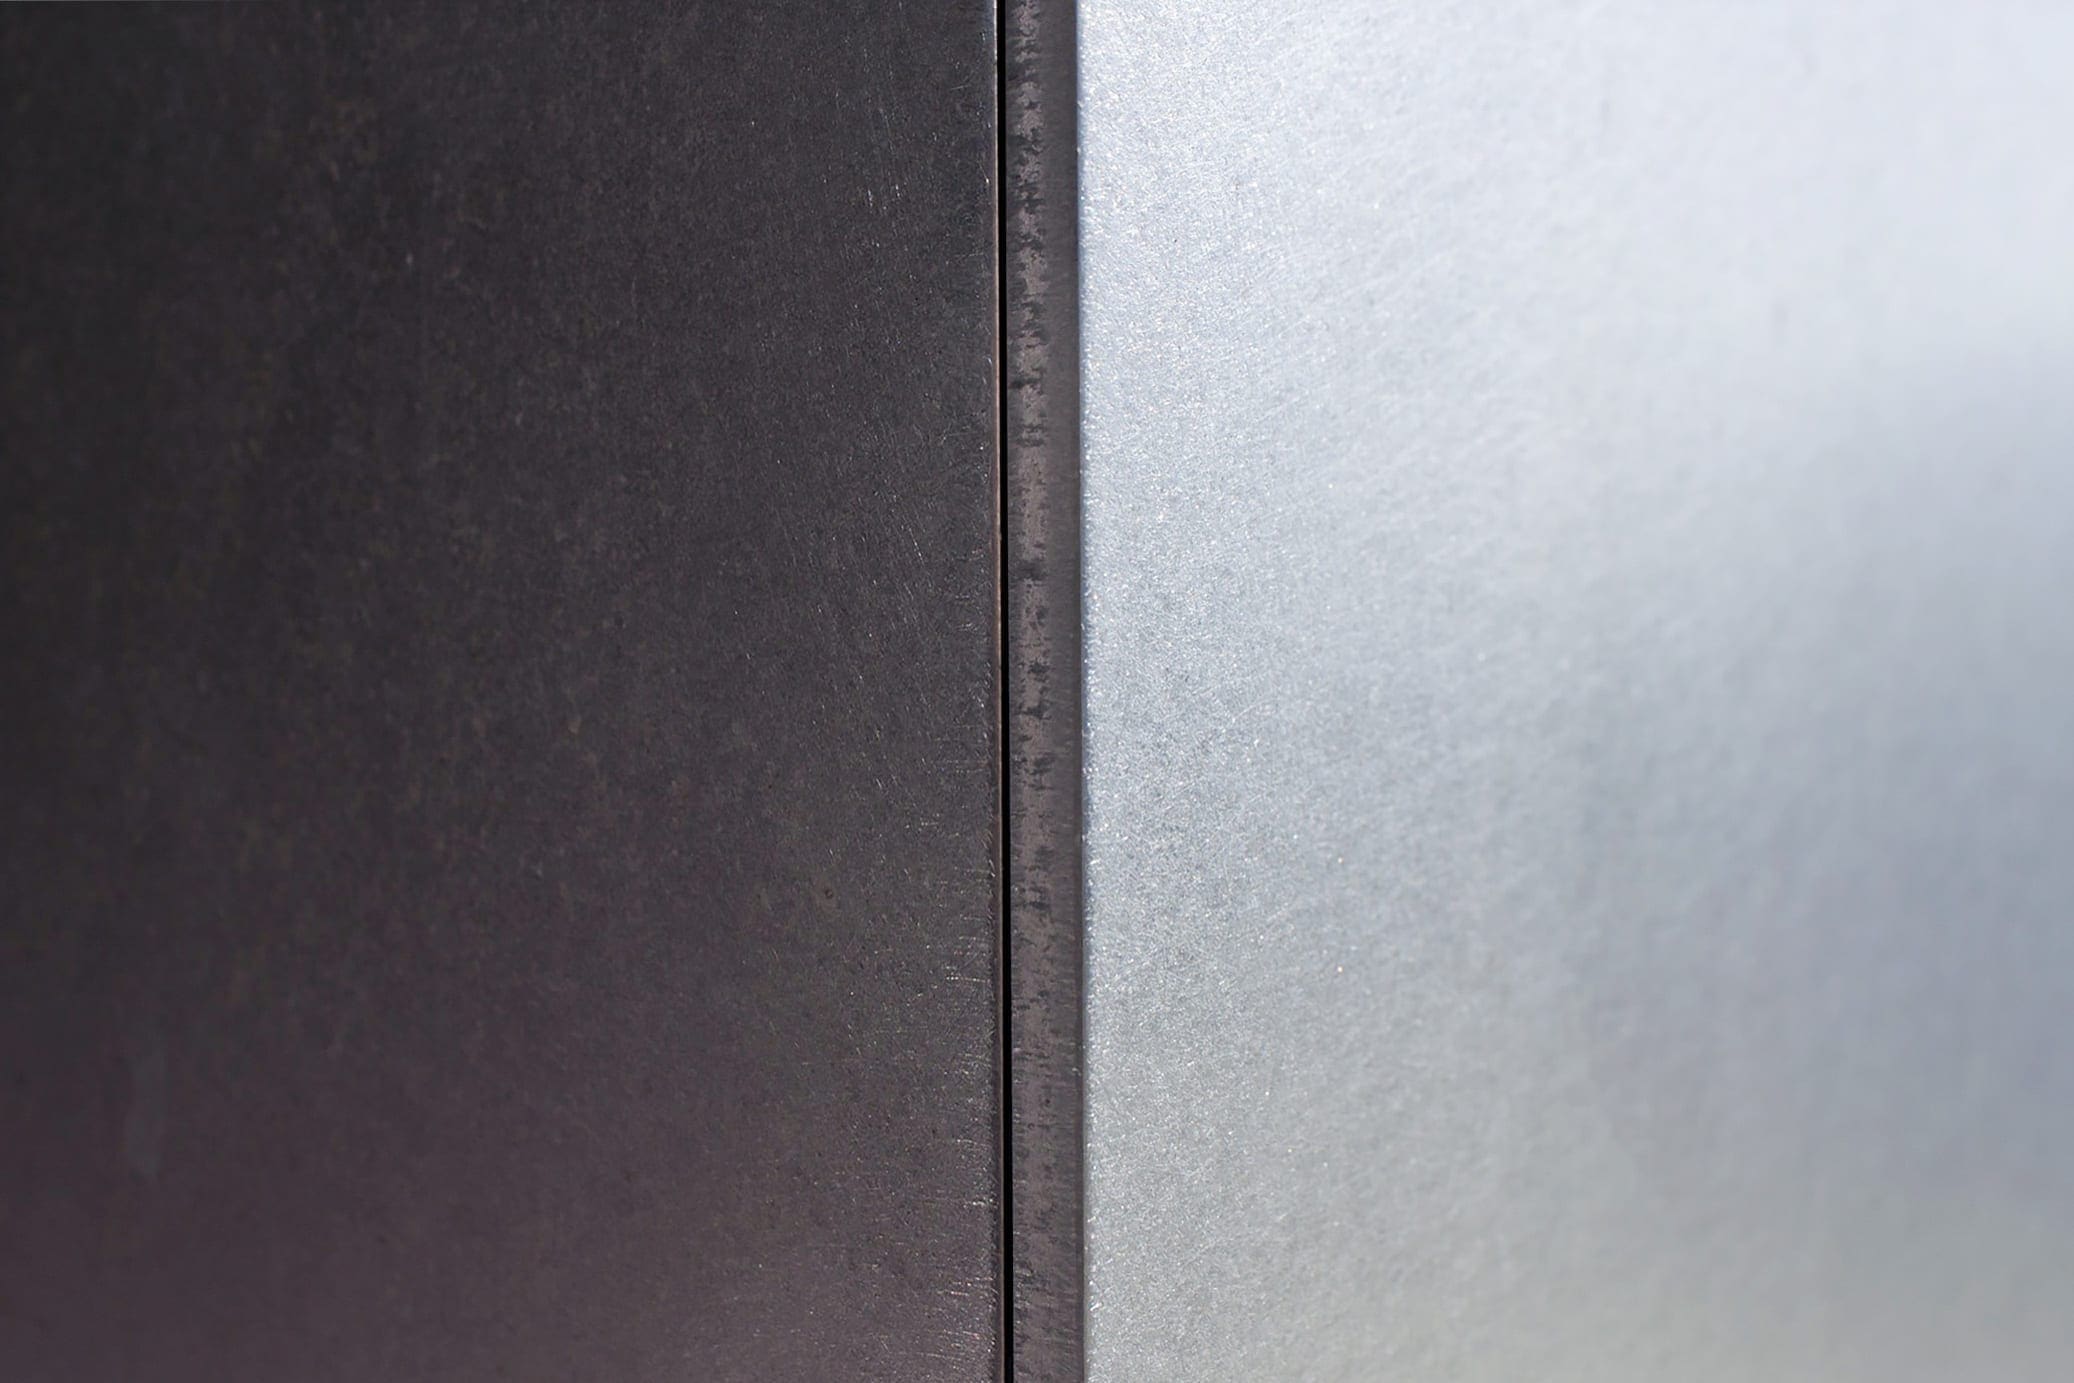 Detail of the Angel Hair® surface used on the stainless steel fins.